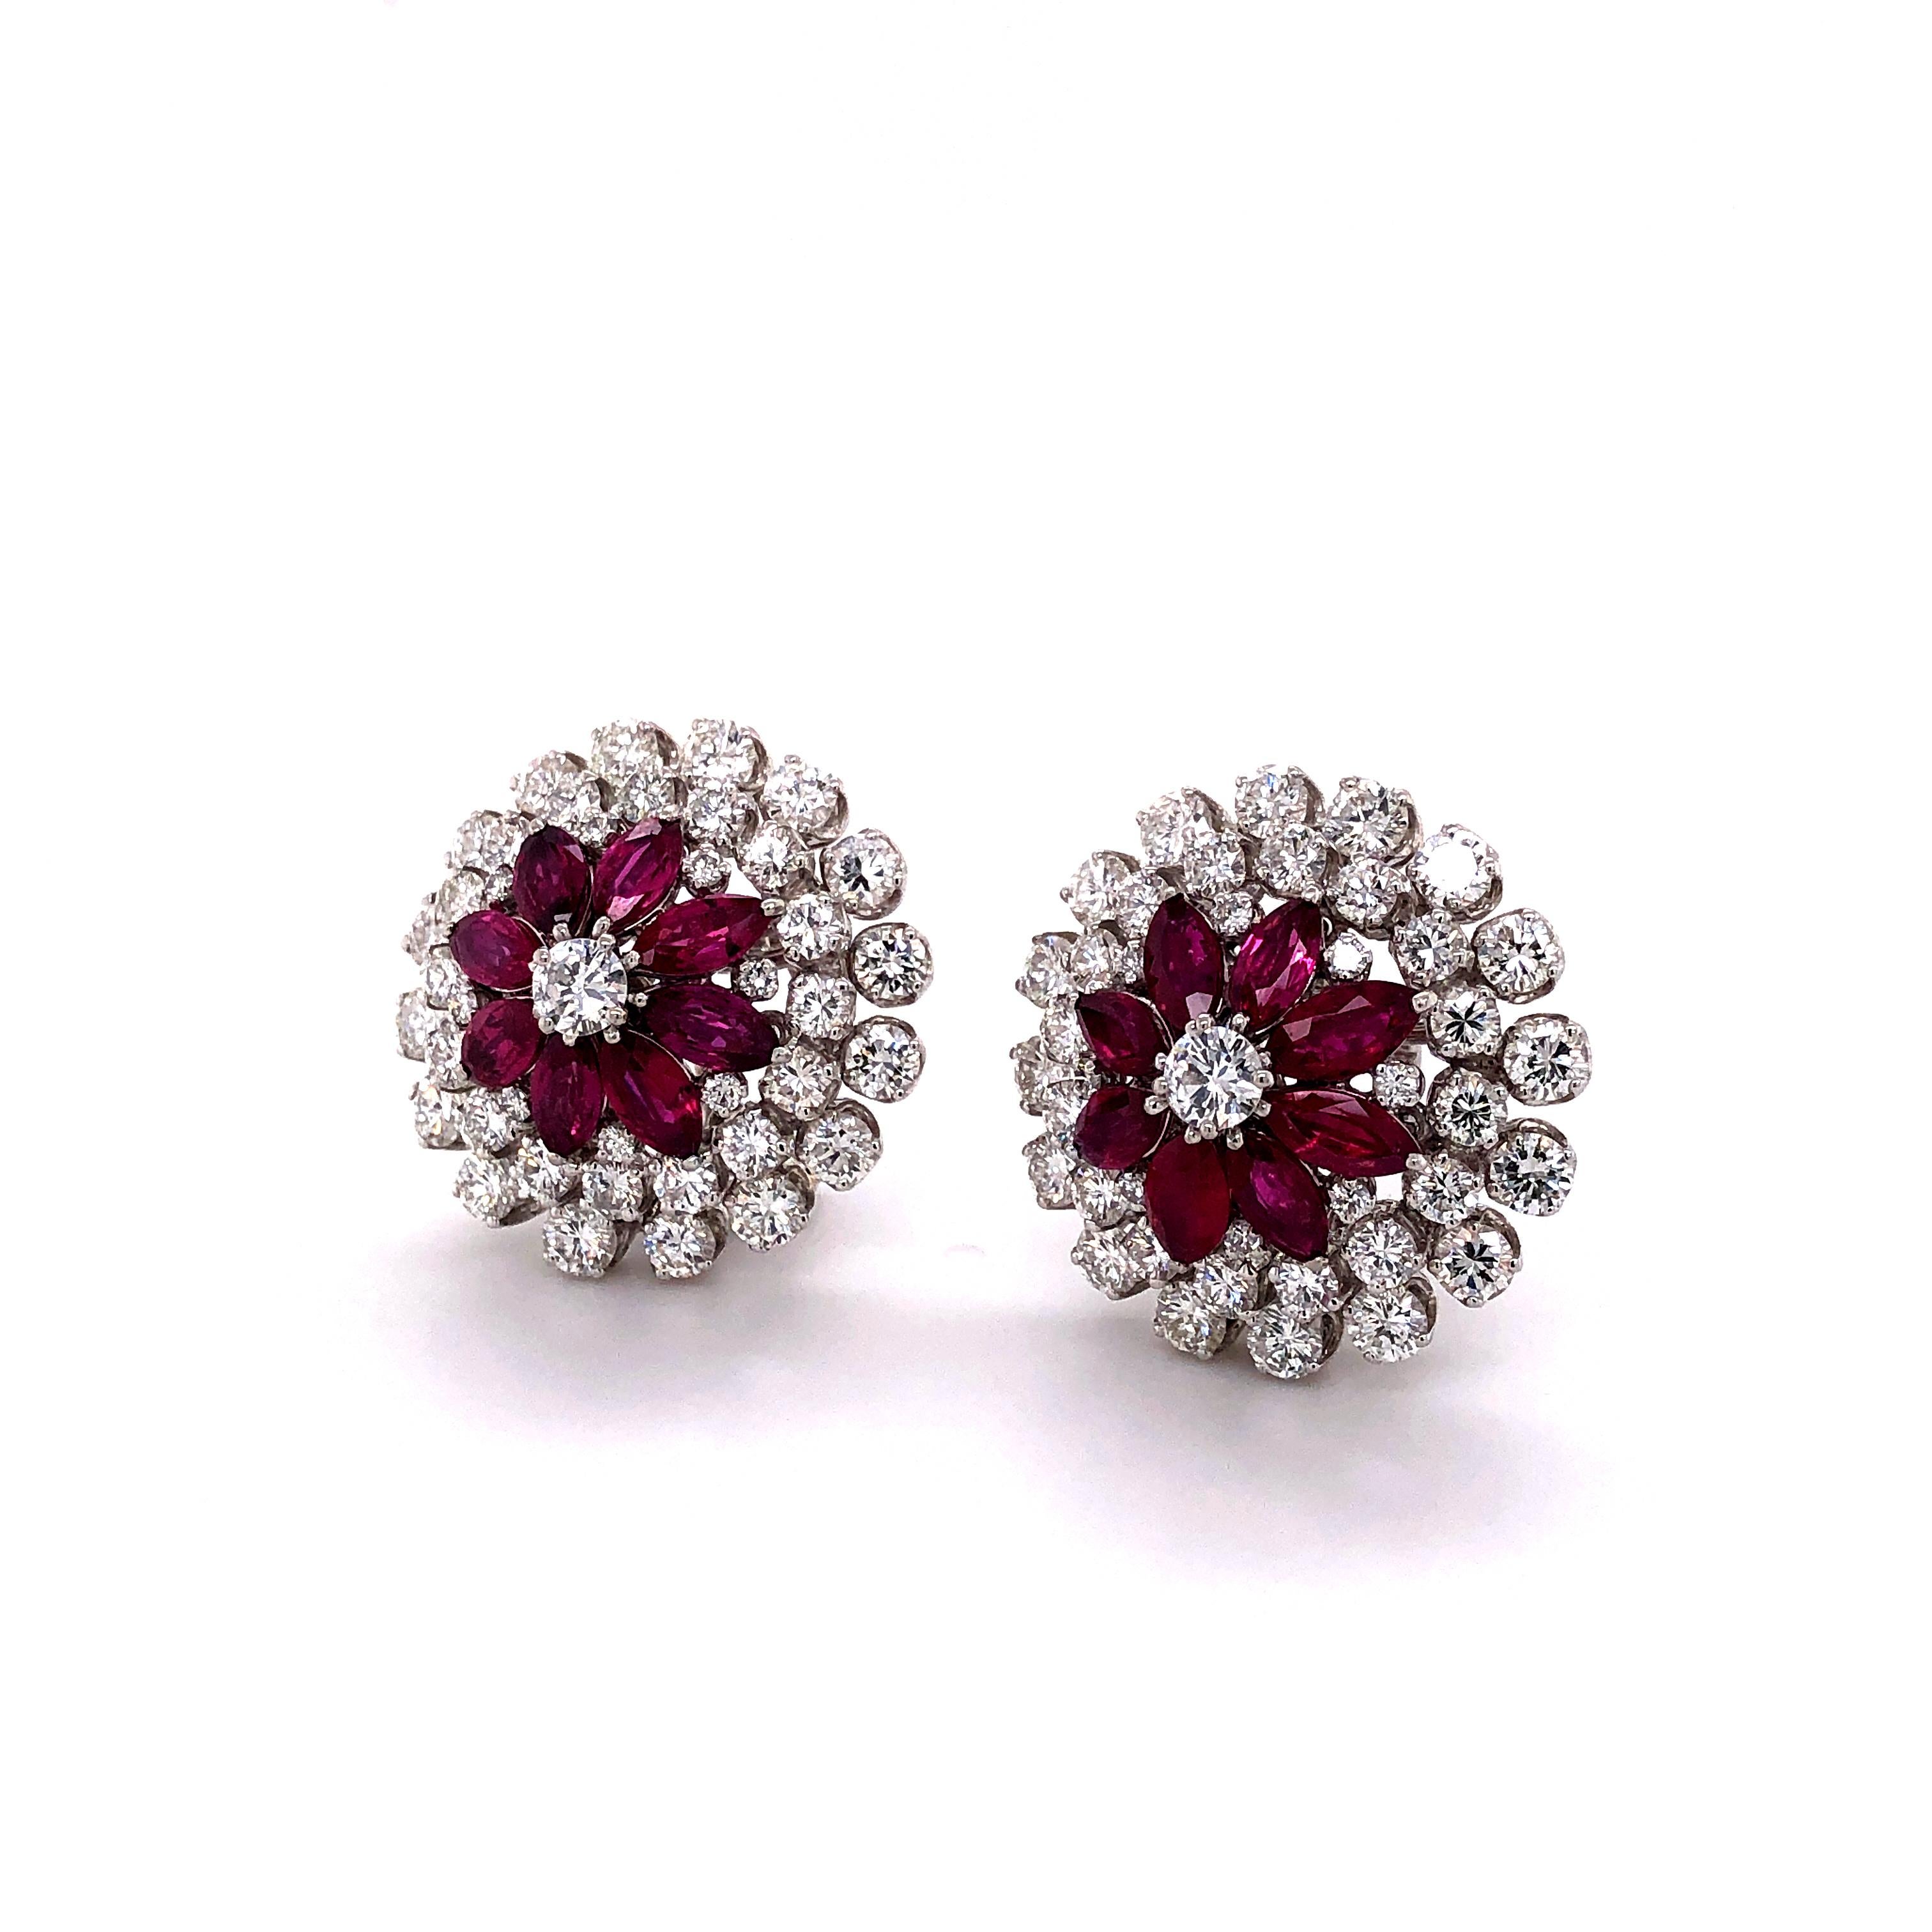 Charming pair of platinum earclips featuring 16 glowing marquise shaped rubies, total weight approximately 4.00 carats. Surrounded by 82 brilliant-cut diamonds of G and H color and vs clarity, total weight approximately 6.00 carats.

btw we have a